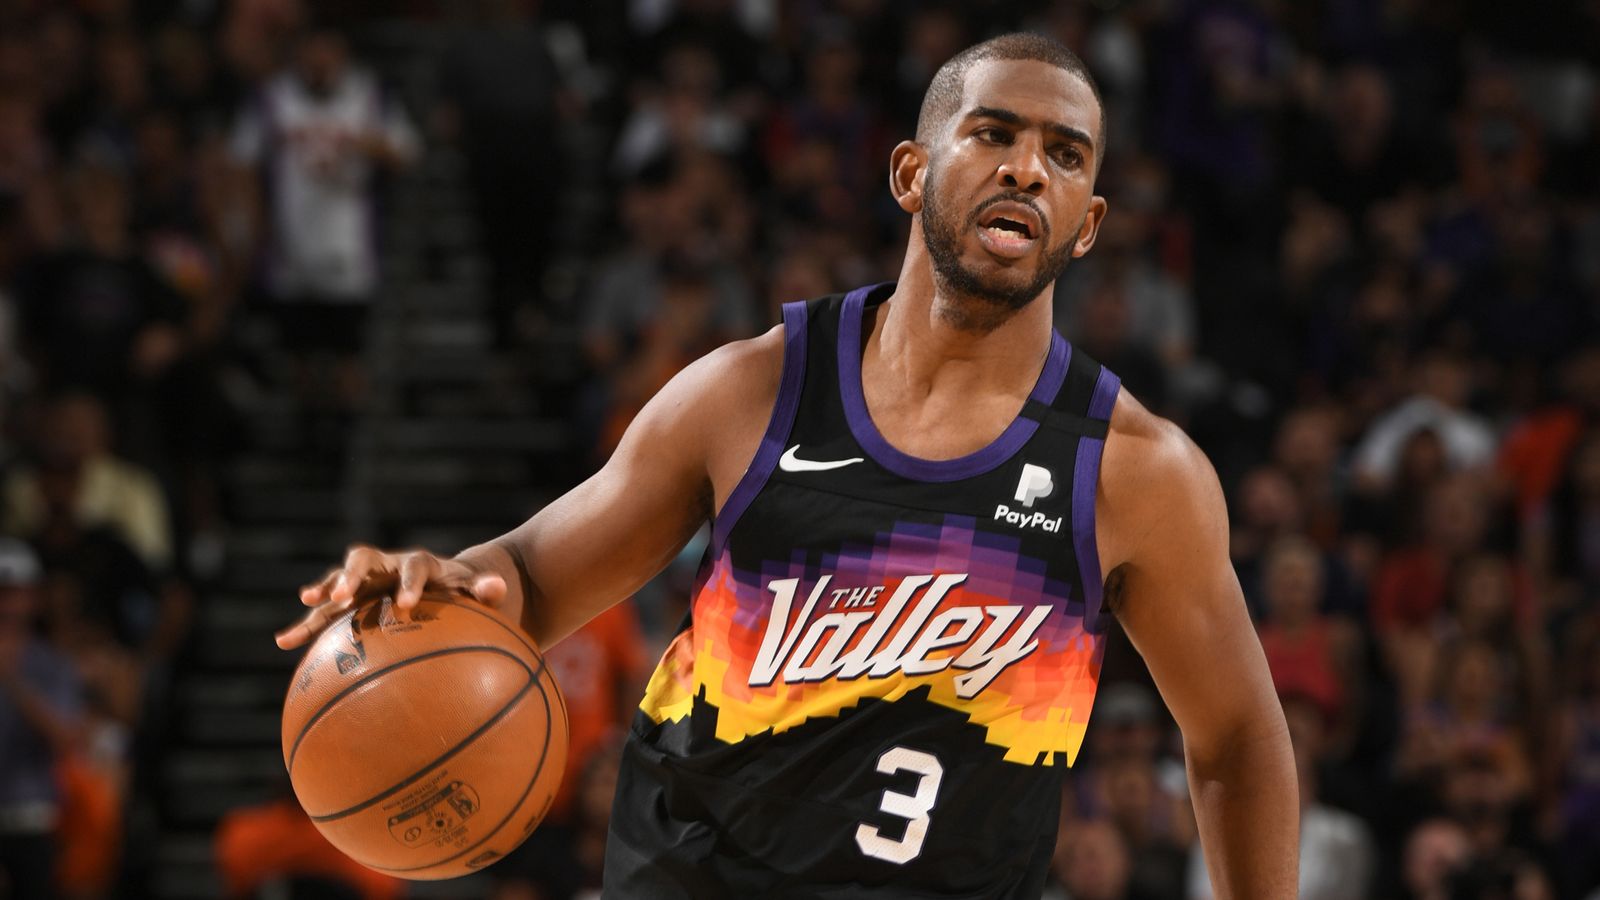 Chris Paul takes over in fourth quarter to lead Phoenix Suns past Denver Nuggets